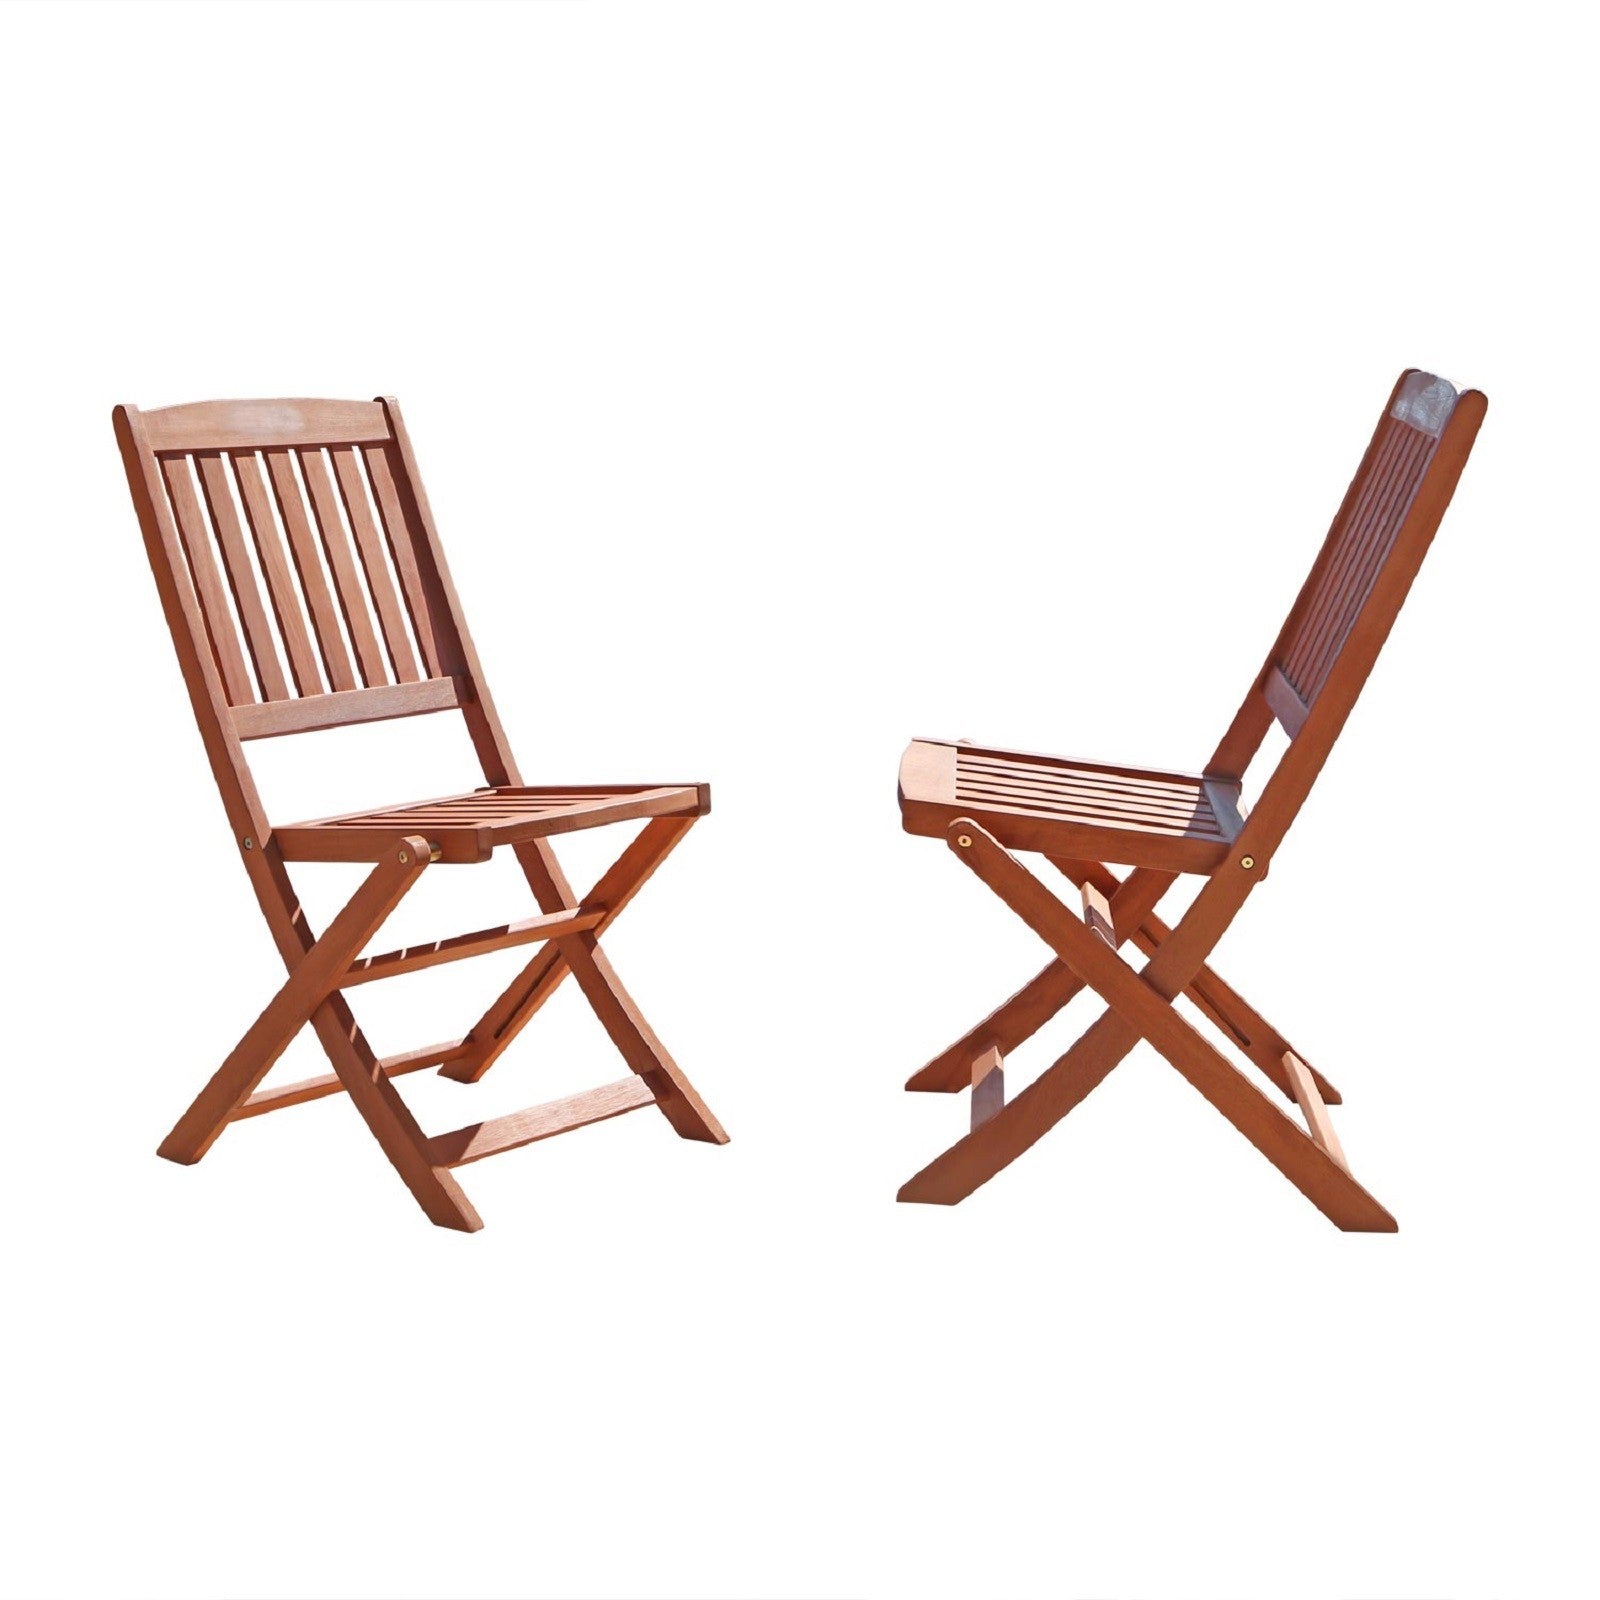 Set-Of-Two-Brown-Folding-Chairs-Outdoor-Chairs